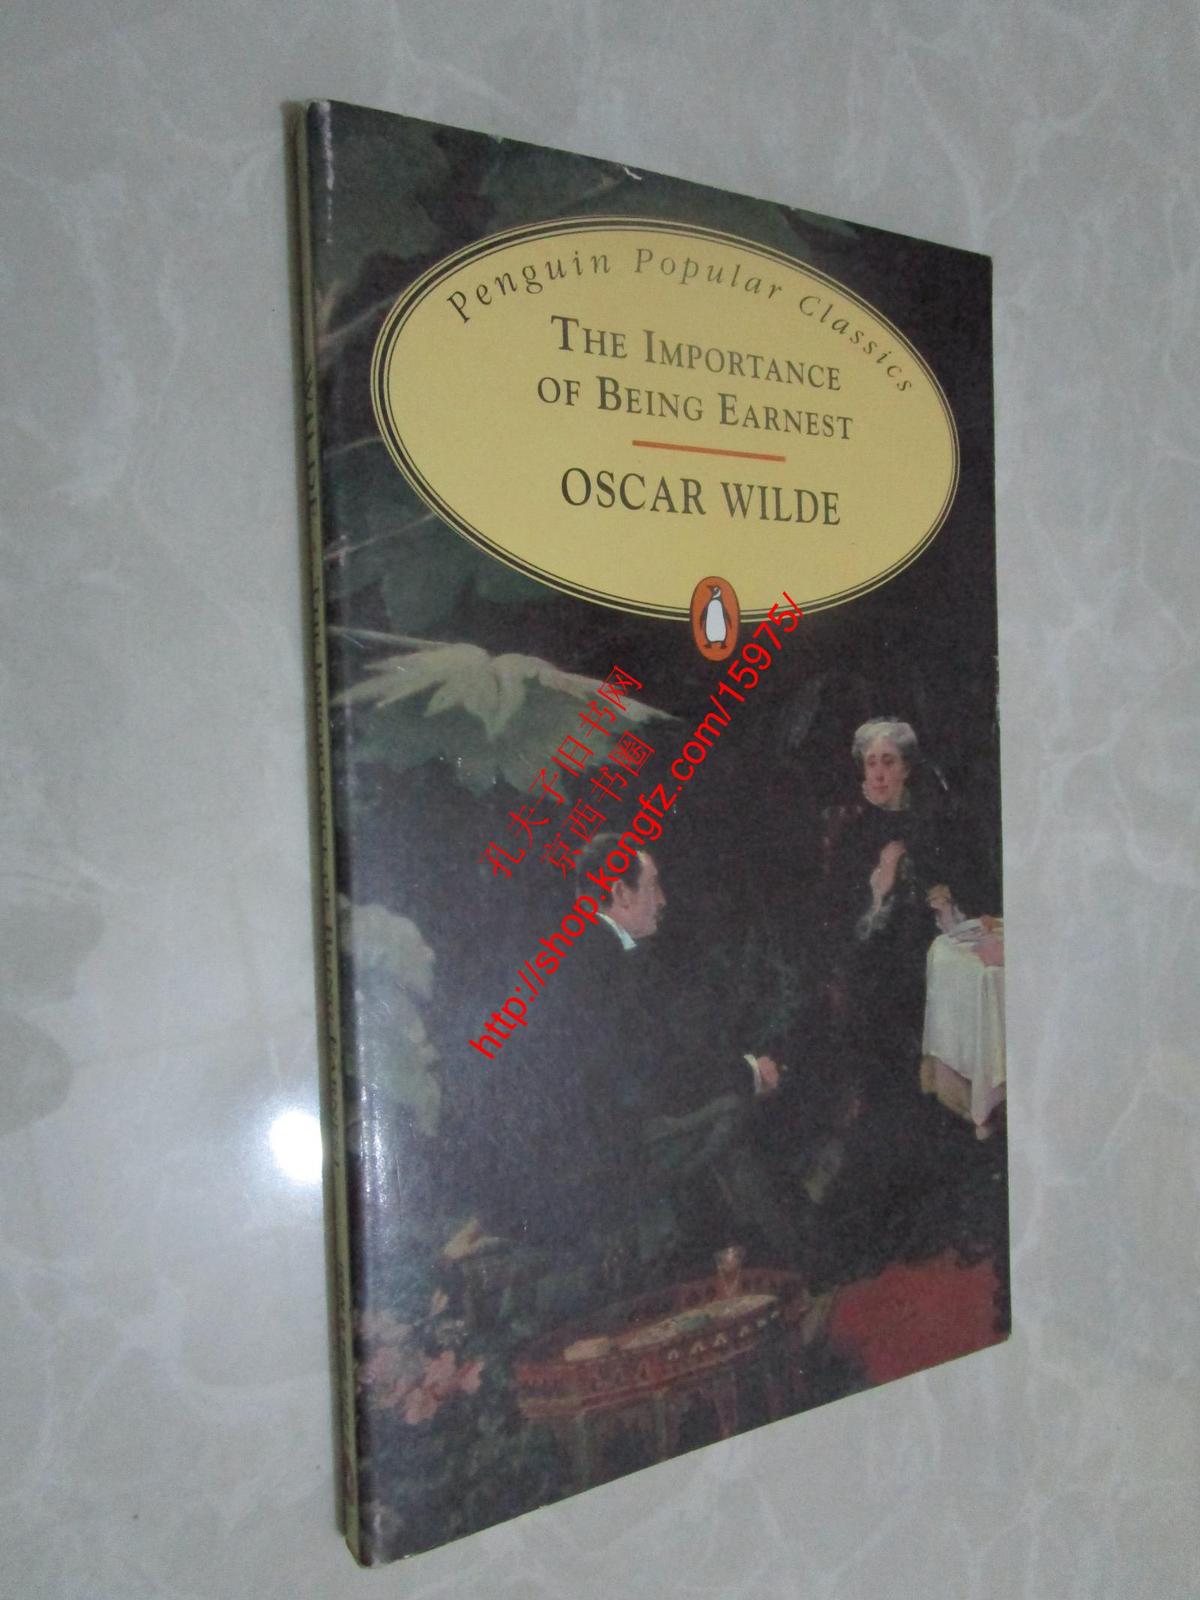 Importance of Being Earnest  （Penguin Popular Classics）